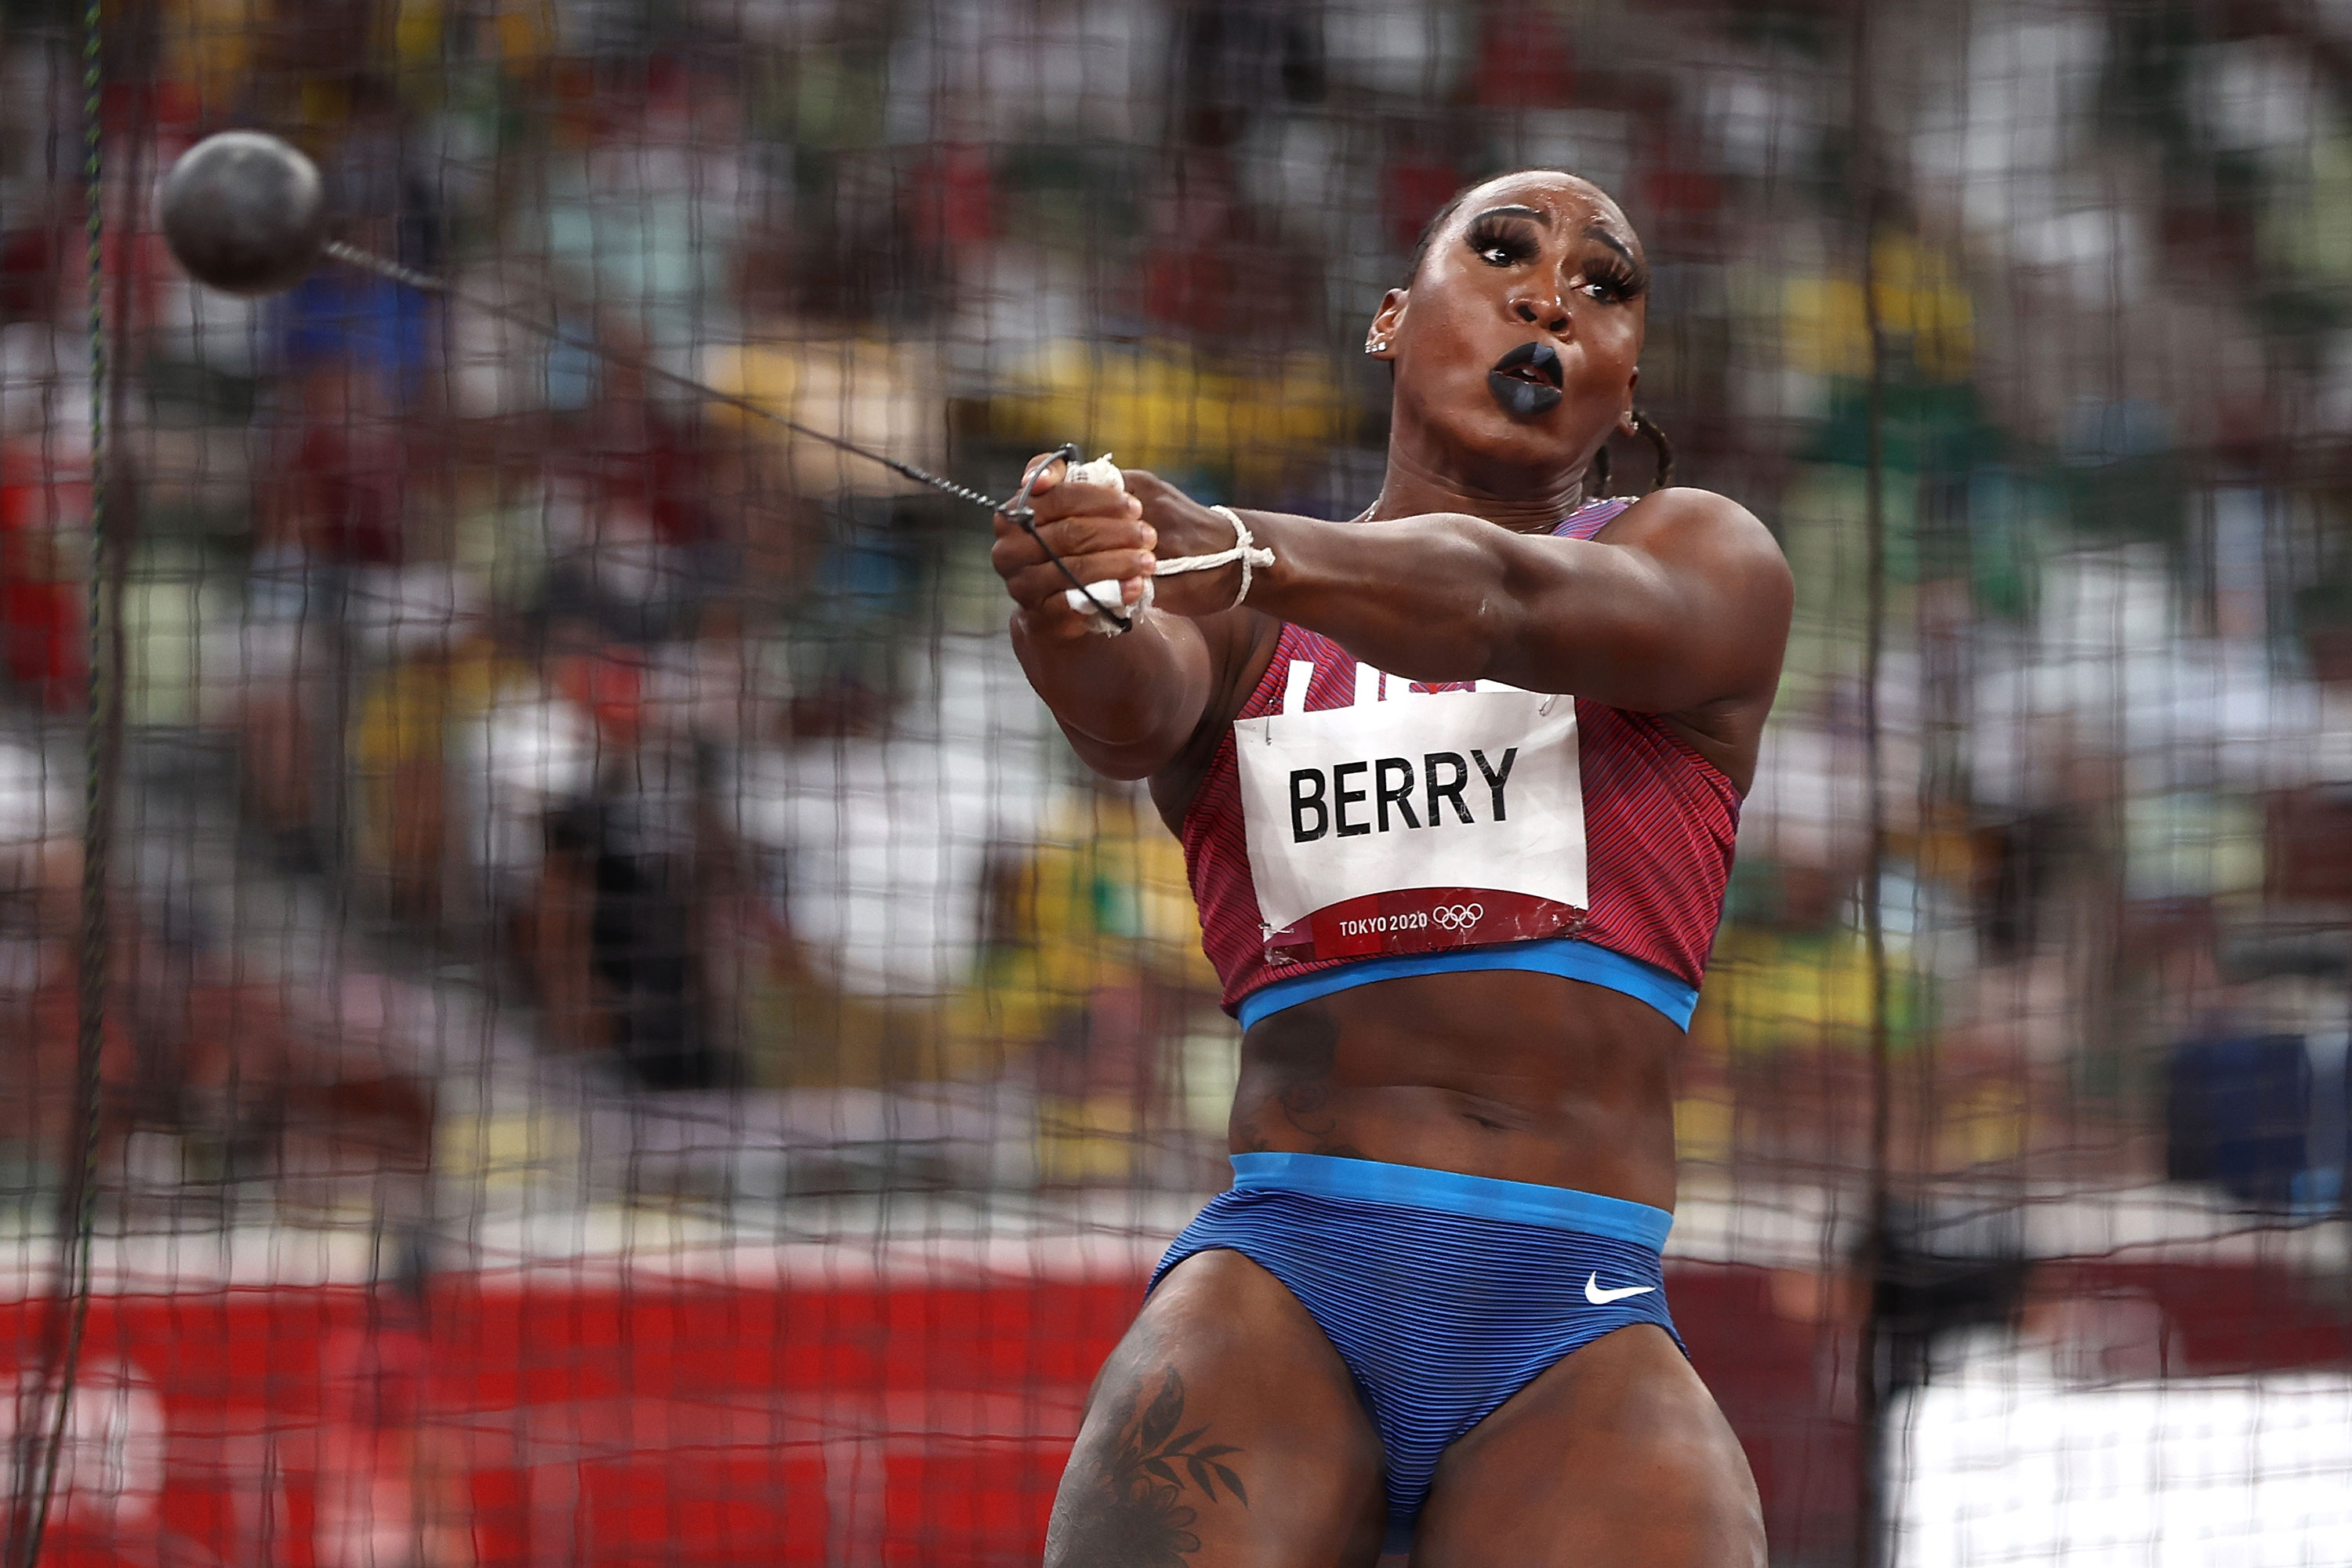 American Gwen Berry competes in the hammer throw final on August 3.